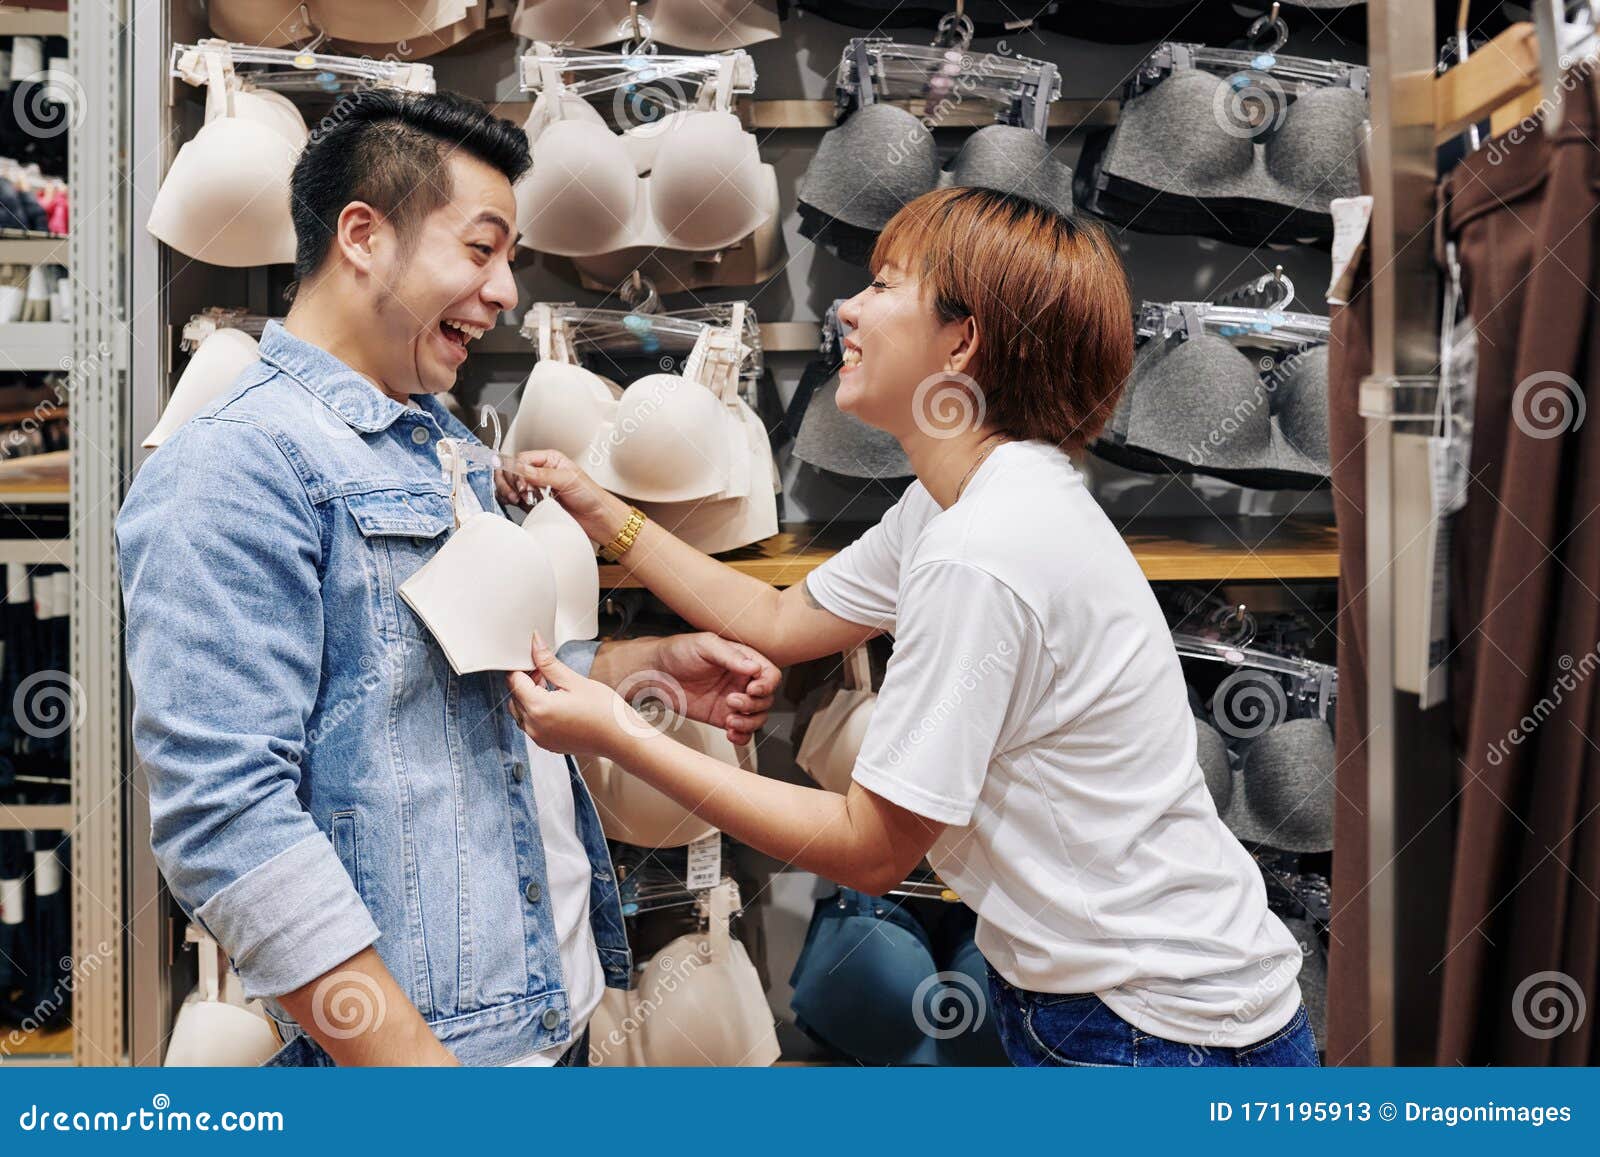 Funny Couple in Underwear Store Stock Image - Image of choosing, males:  171195913